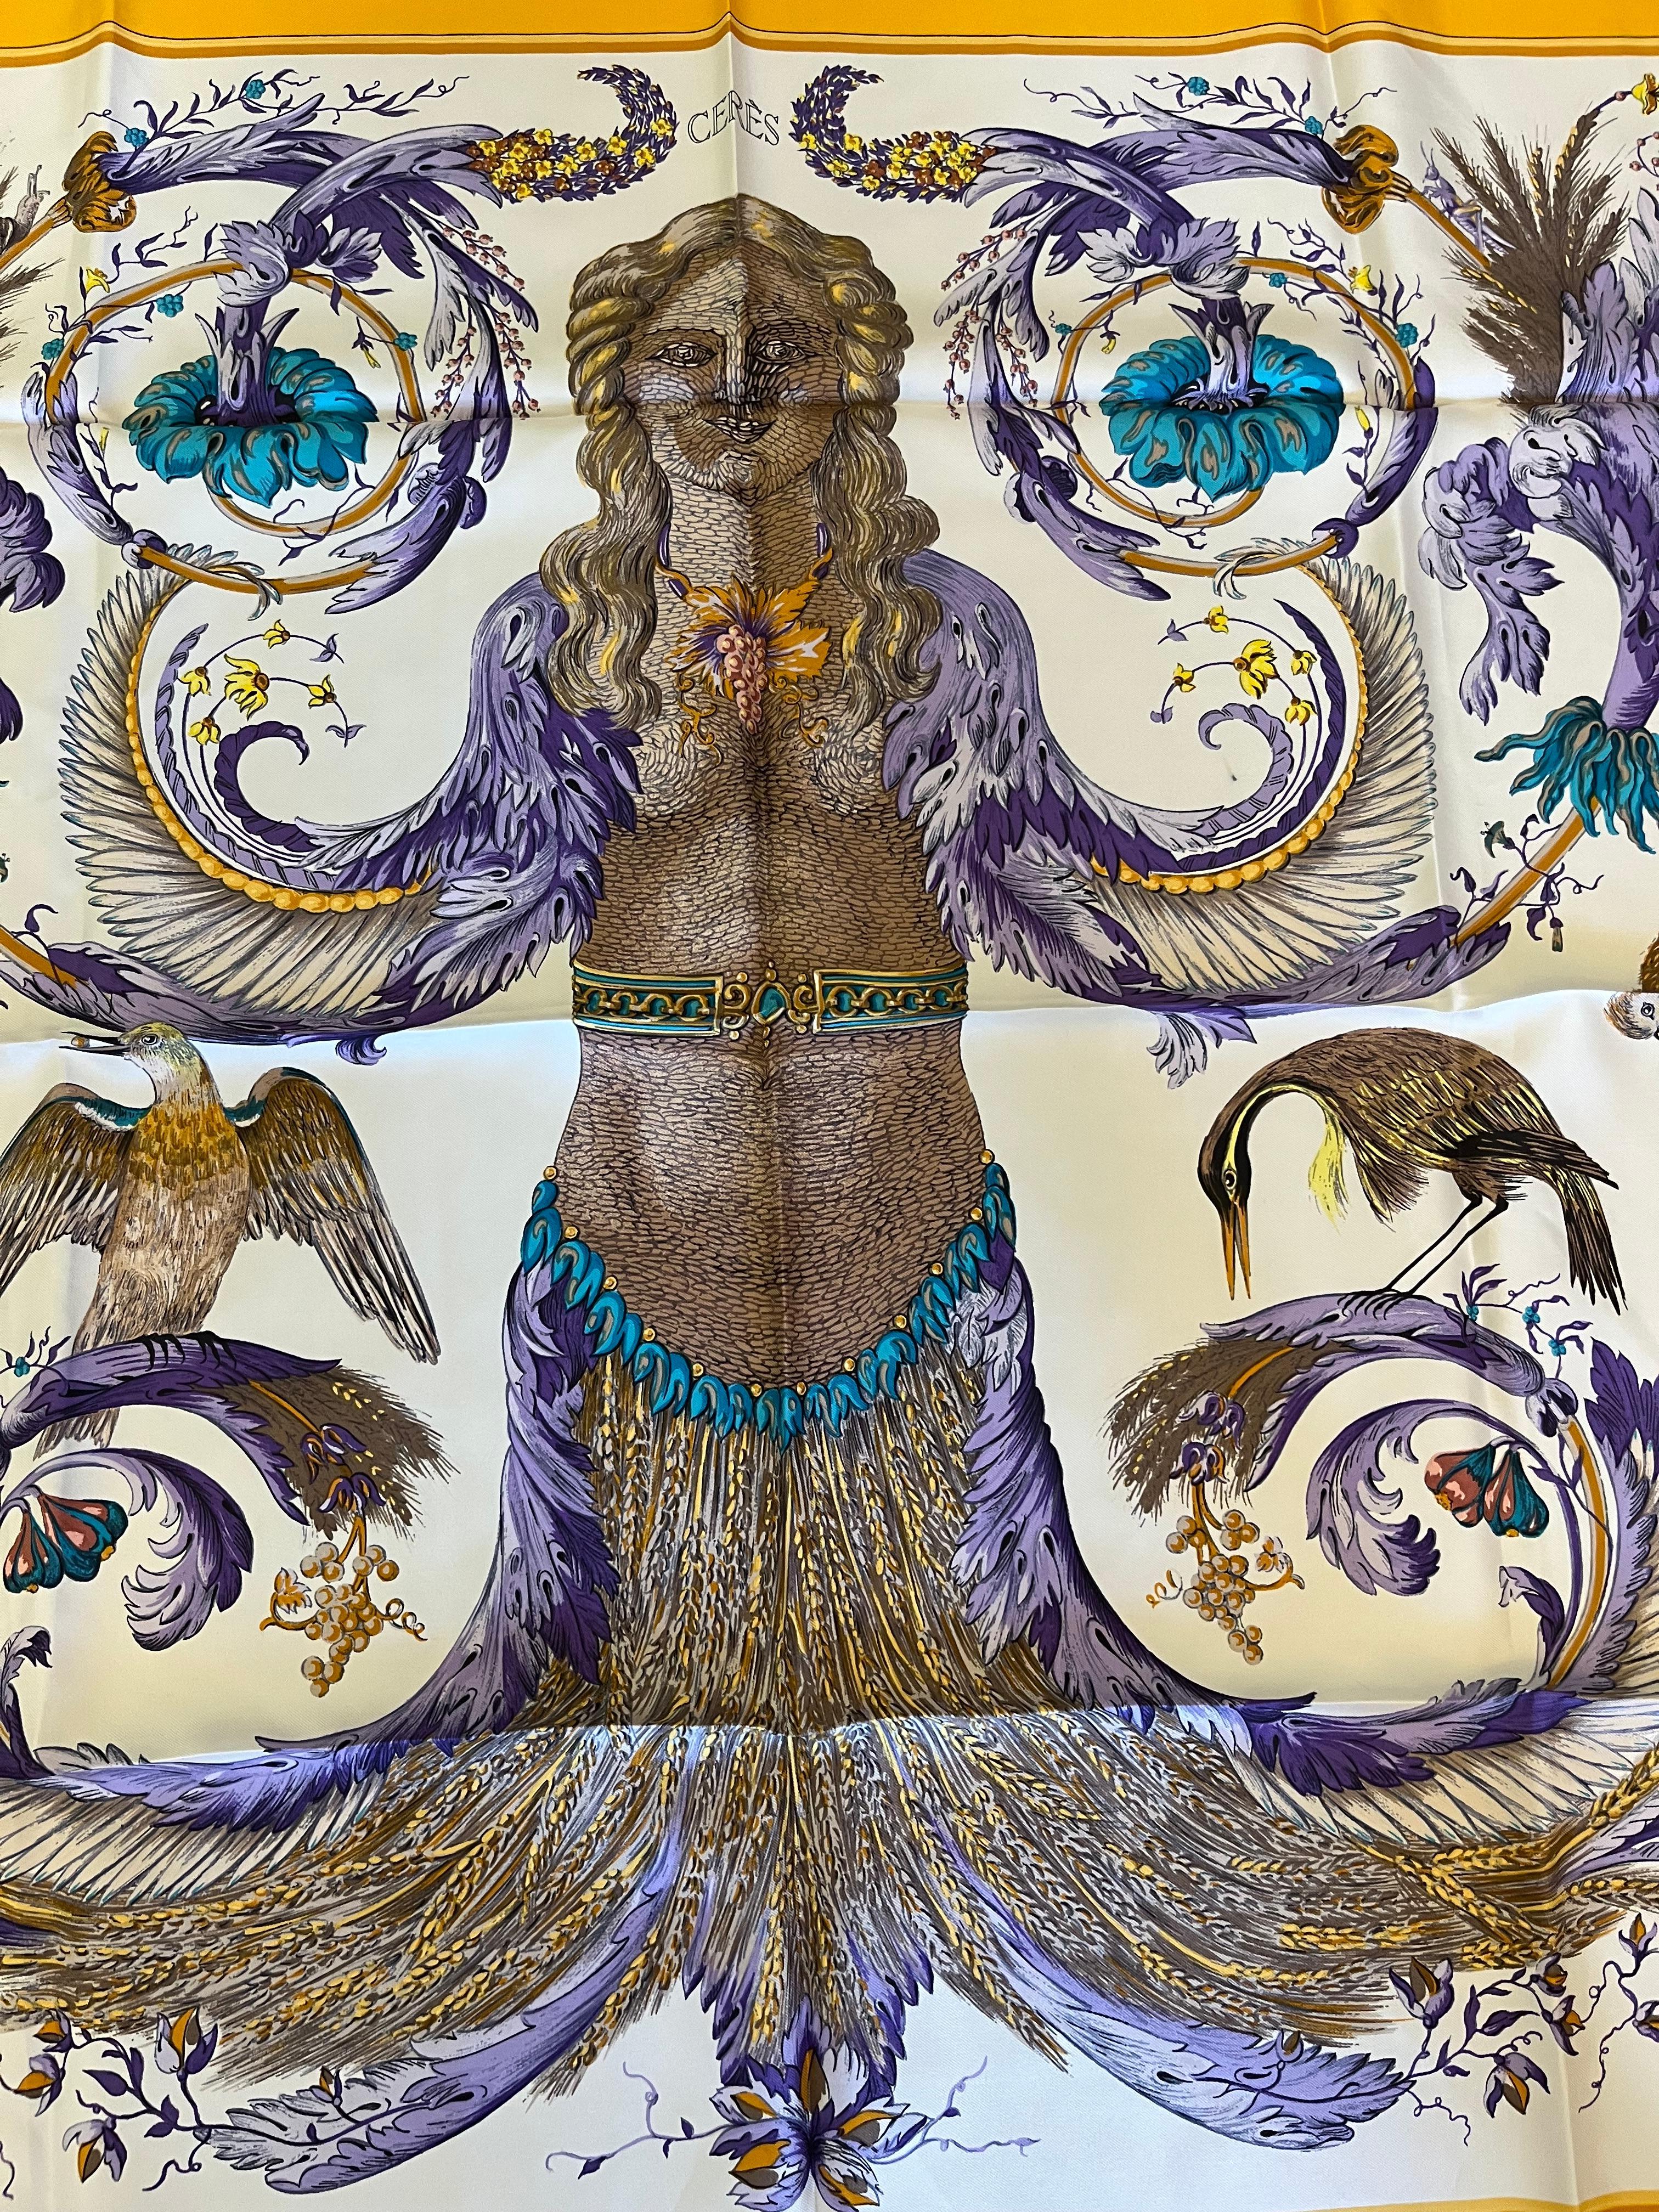 1967 Hermes silk scarf designed by Francoise Faconnet . This vintage silk scarf is in amazing condition and its hand rolled hems are nice and plump. Ceres in ancient Roman mythology is the goddess of agriculture, grain crops, fertility and motherly